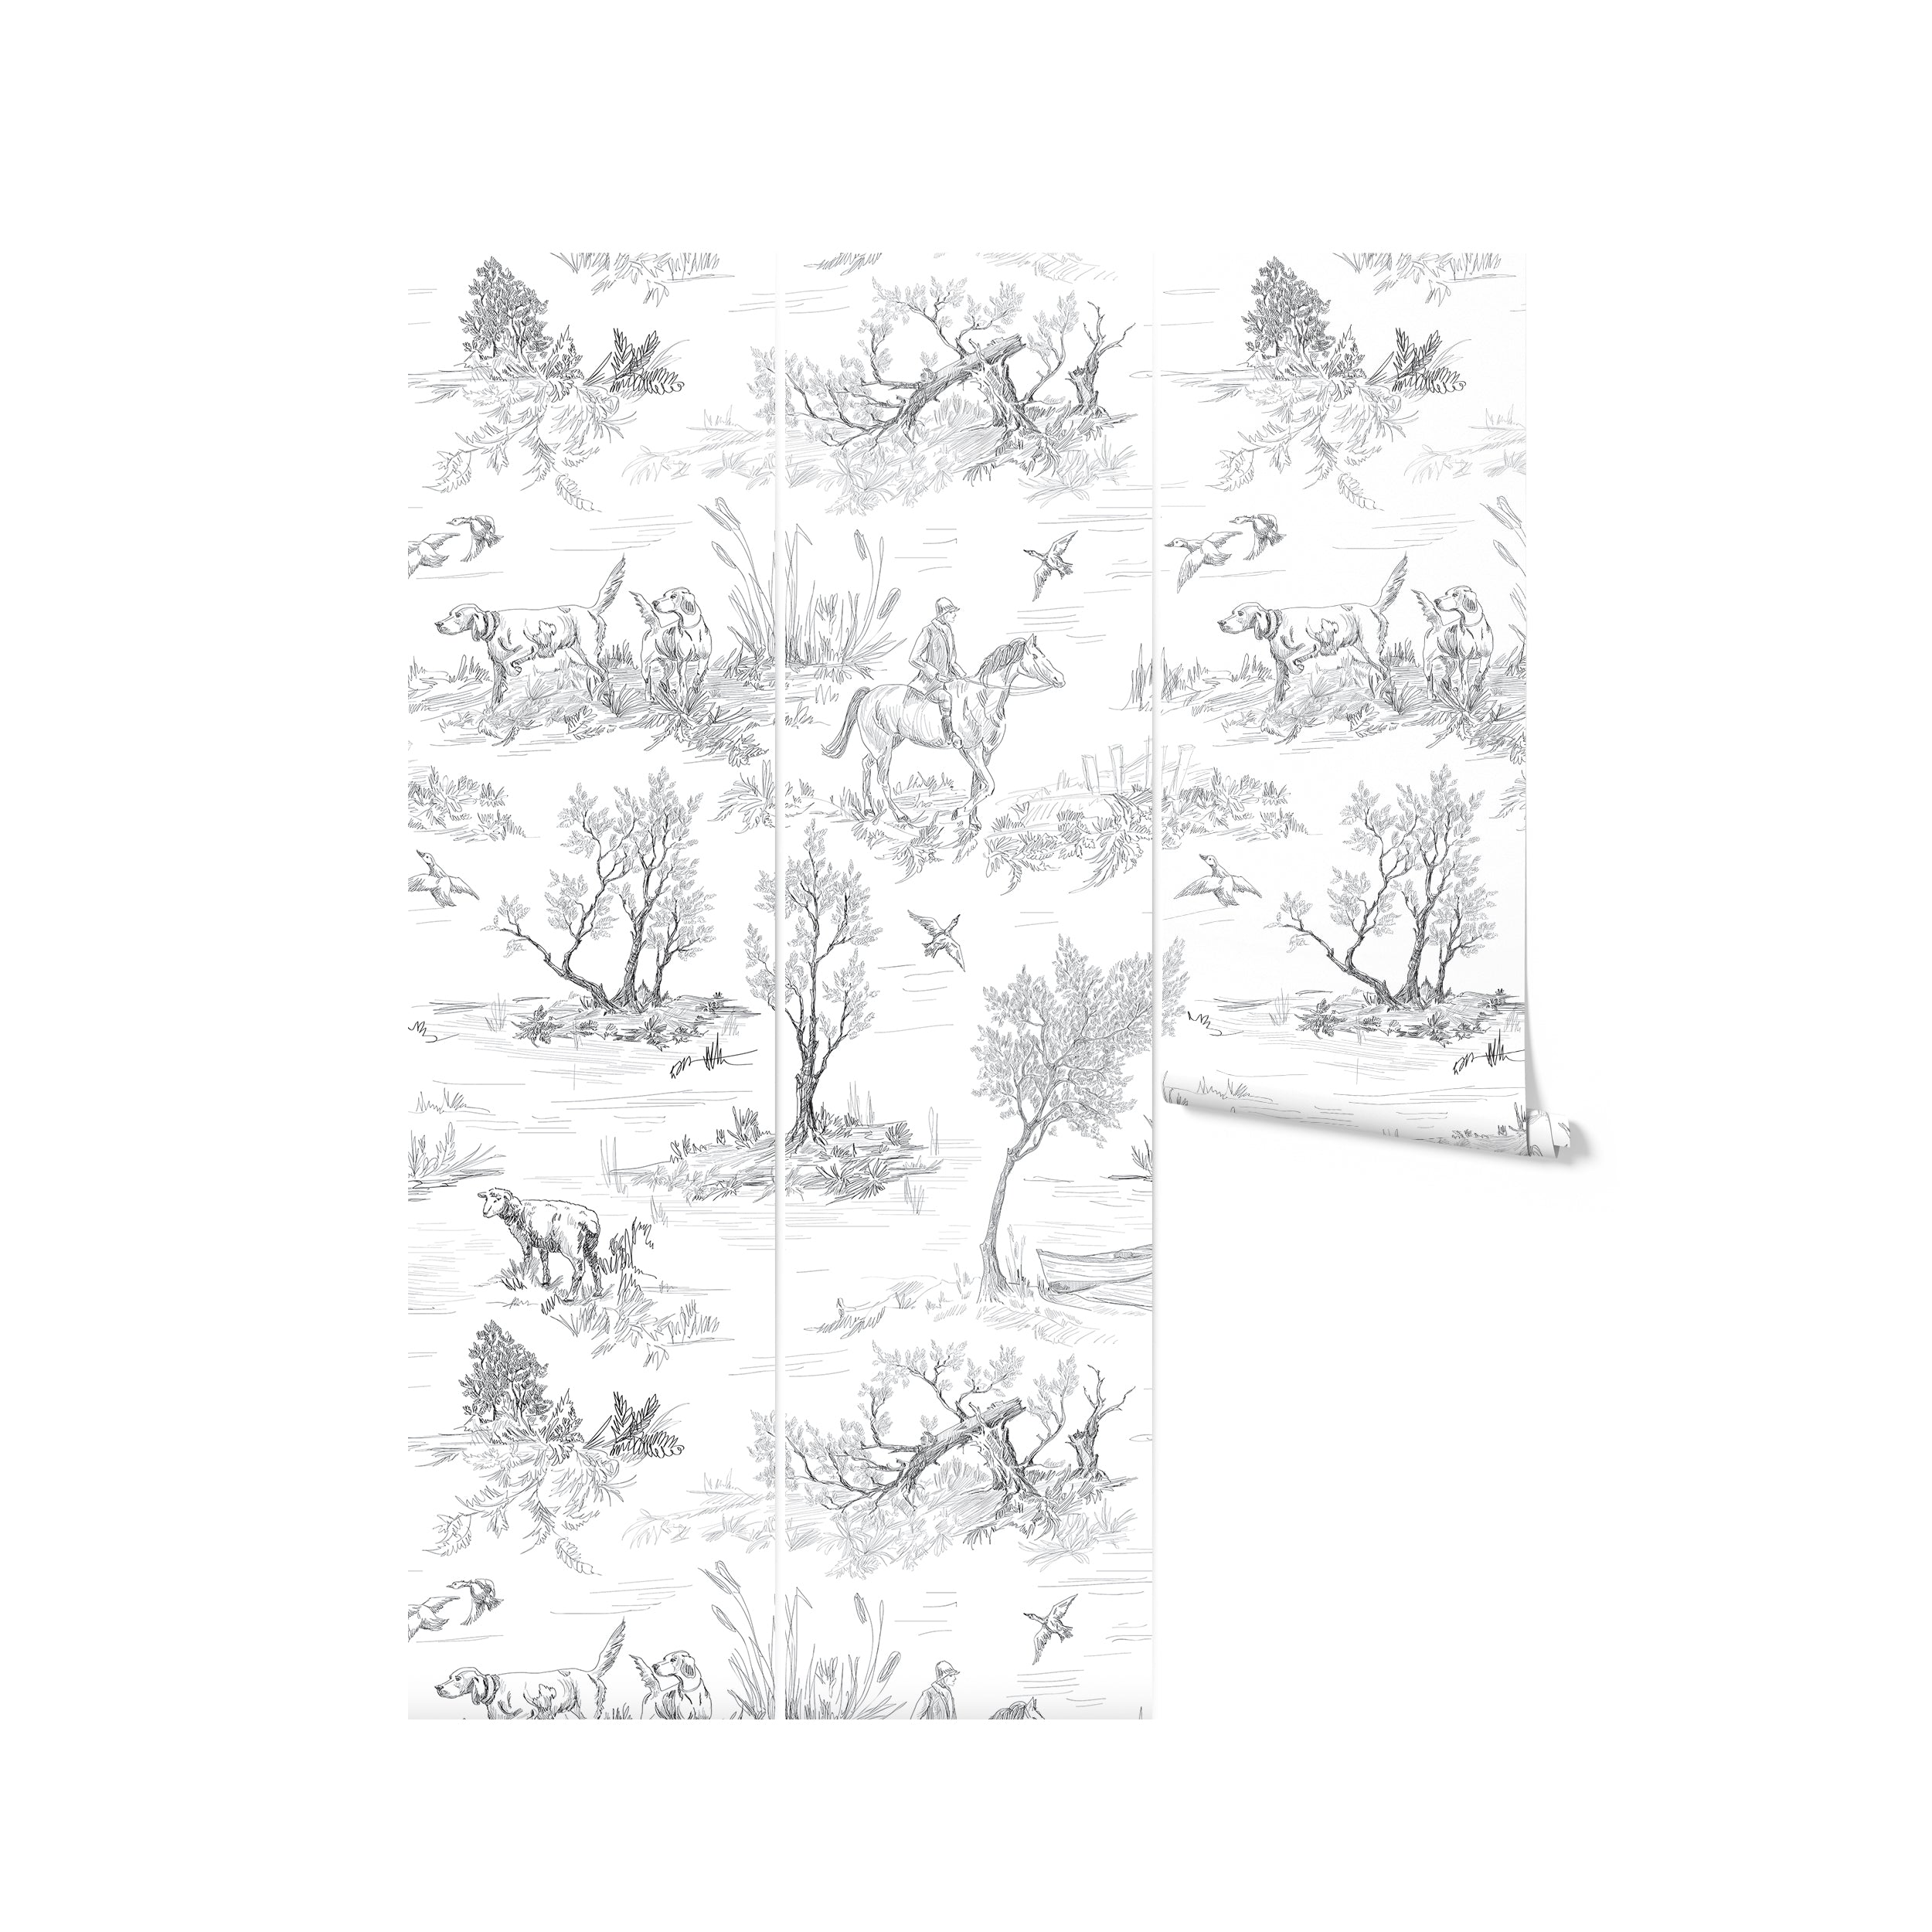 A roll of Outdoor Friend Sketch Wallpaper displayed to show its full design of detailed monochrome sketches of outdoor scenes, including dogs, wildlife, and hunters. The wallpaper's intricate artwork is perfect for adding a dramatic and thematic touch to any room.